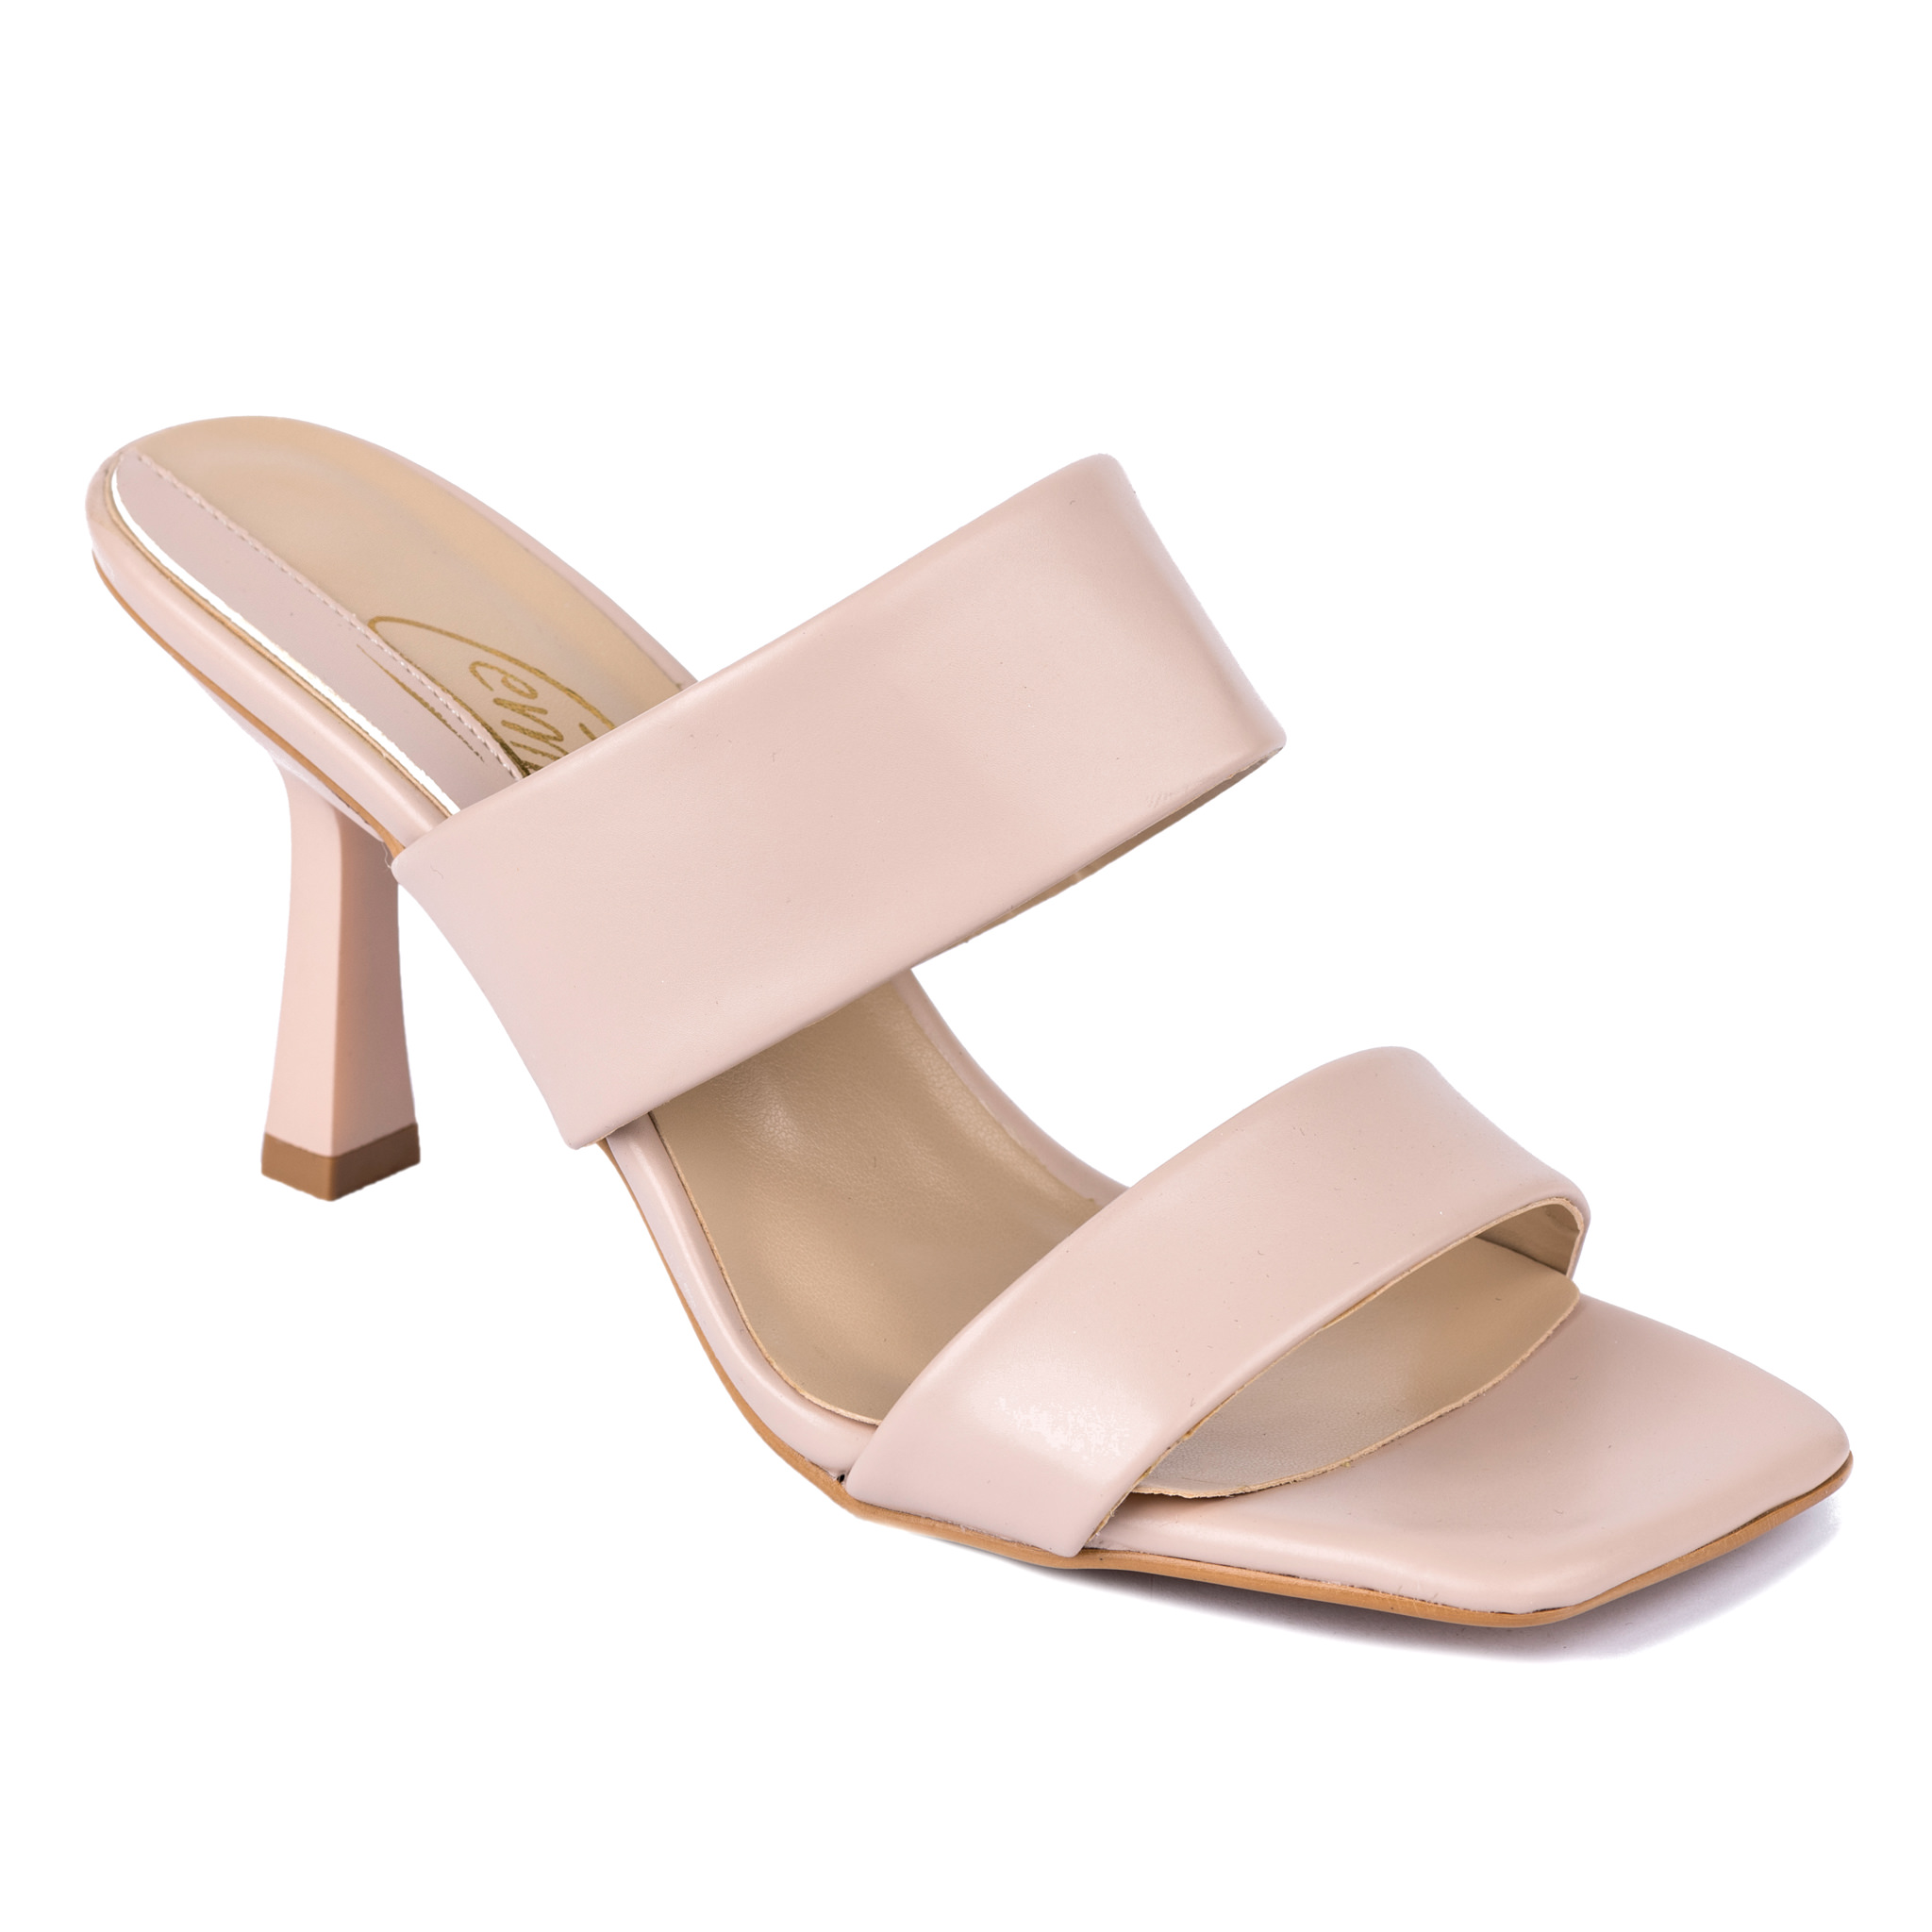 MULES WITH THIN HEEL AND BELTS - BEIGE